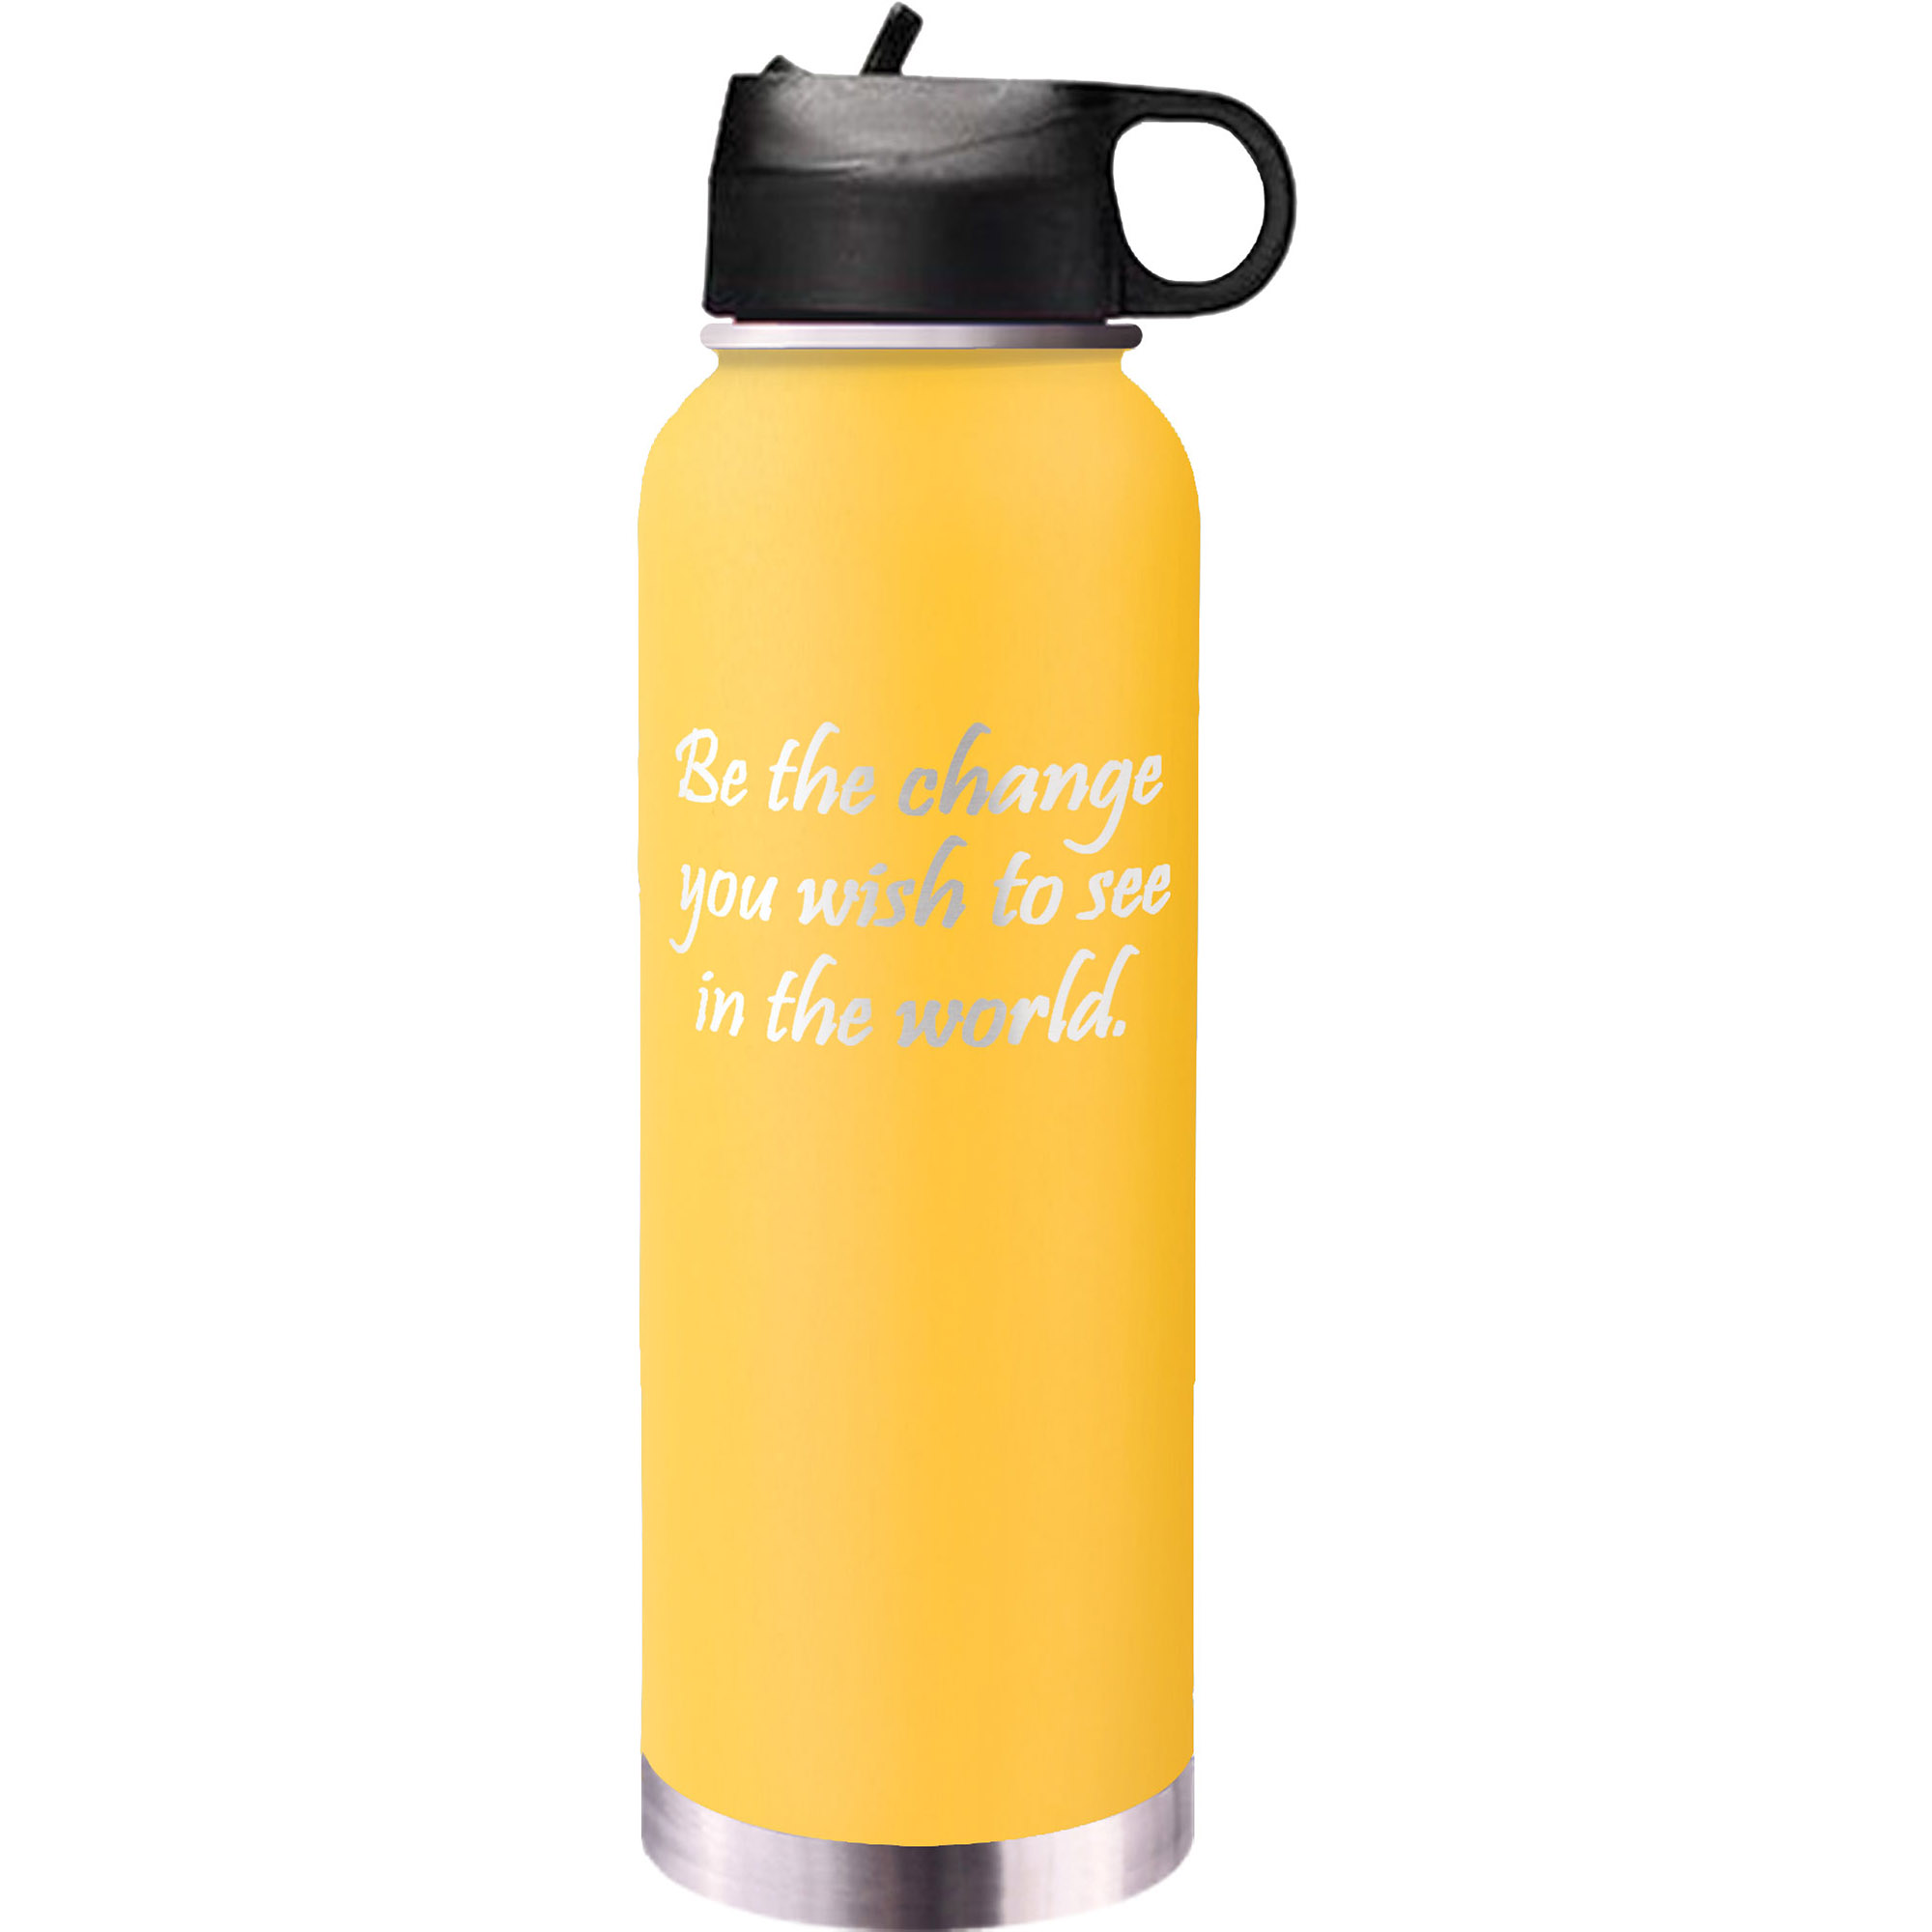 https://images.trophydepot.com/QC/images/products/Tahoe-32-oz-Waterbottle-TMLG17-YLW.jpg